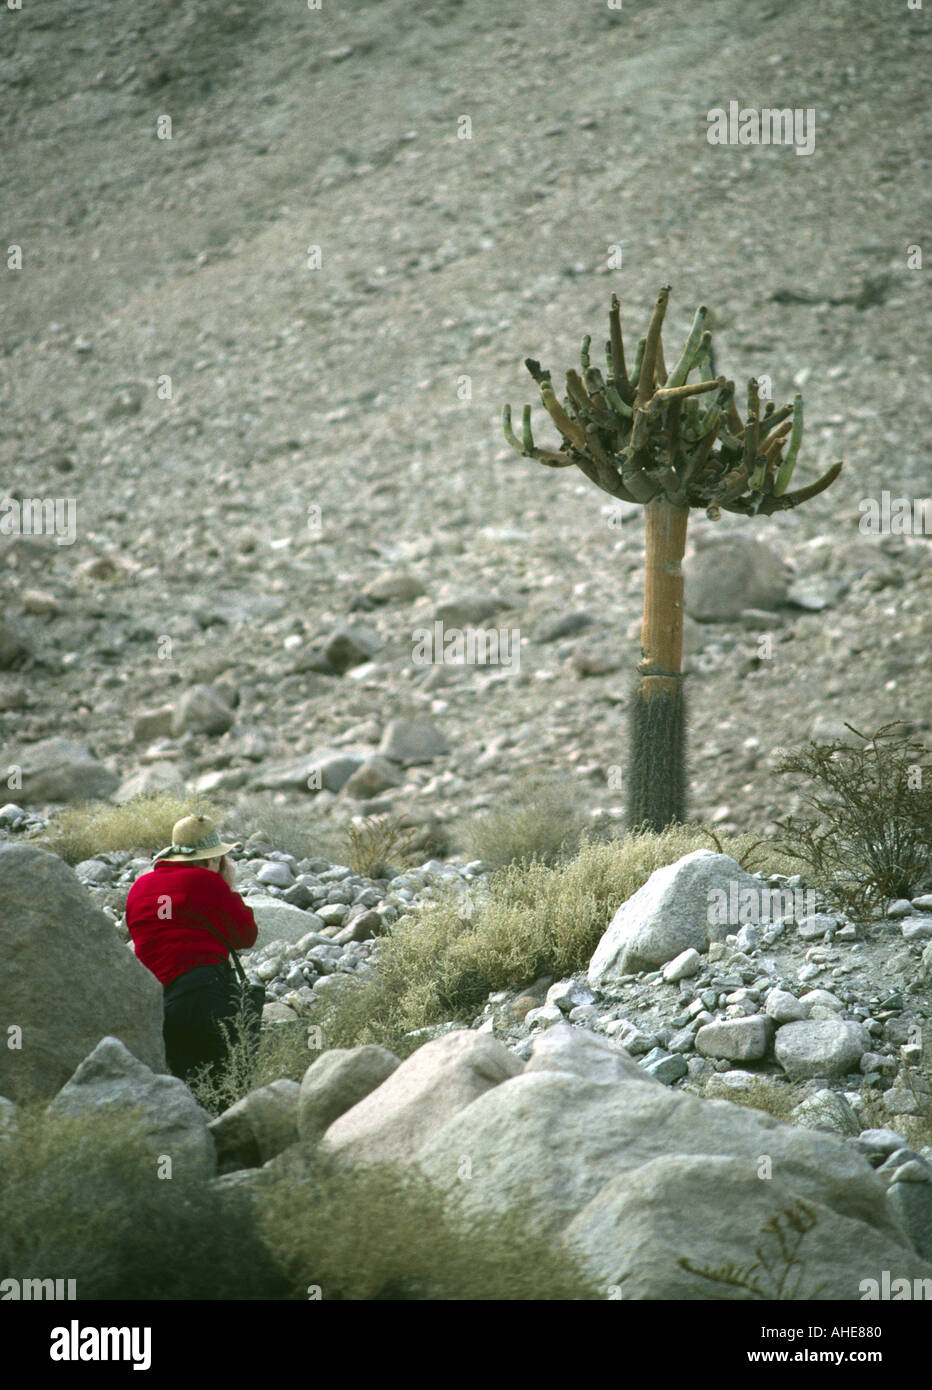 Chile Lauca Park Candelabra cactus on dry western Andean slopes Stock Photo